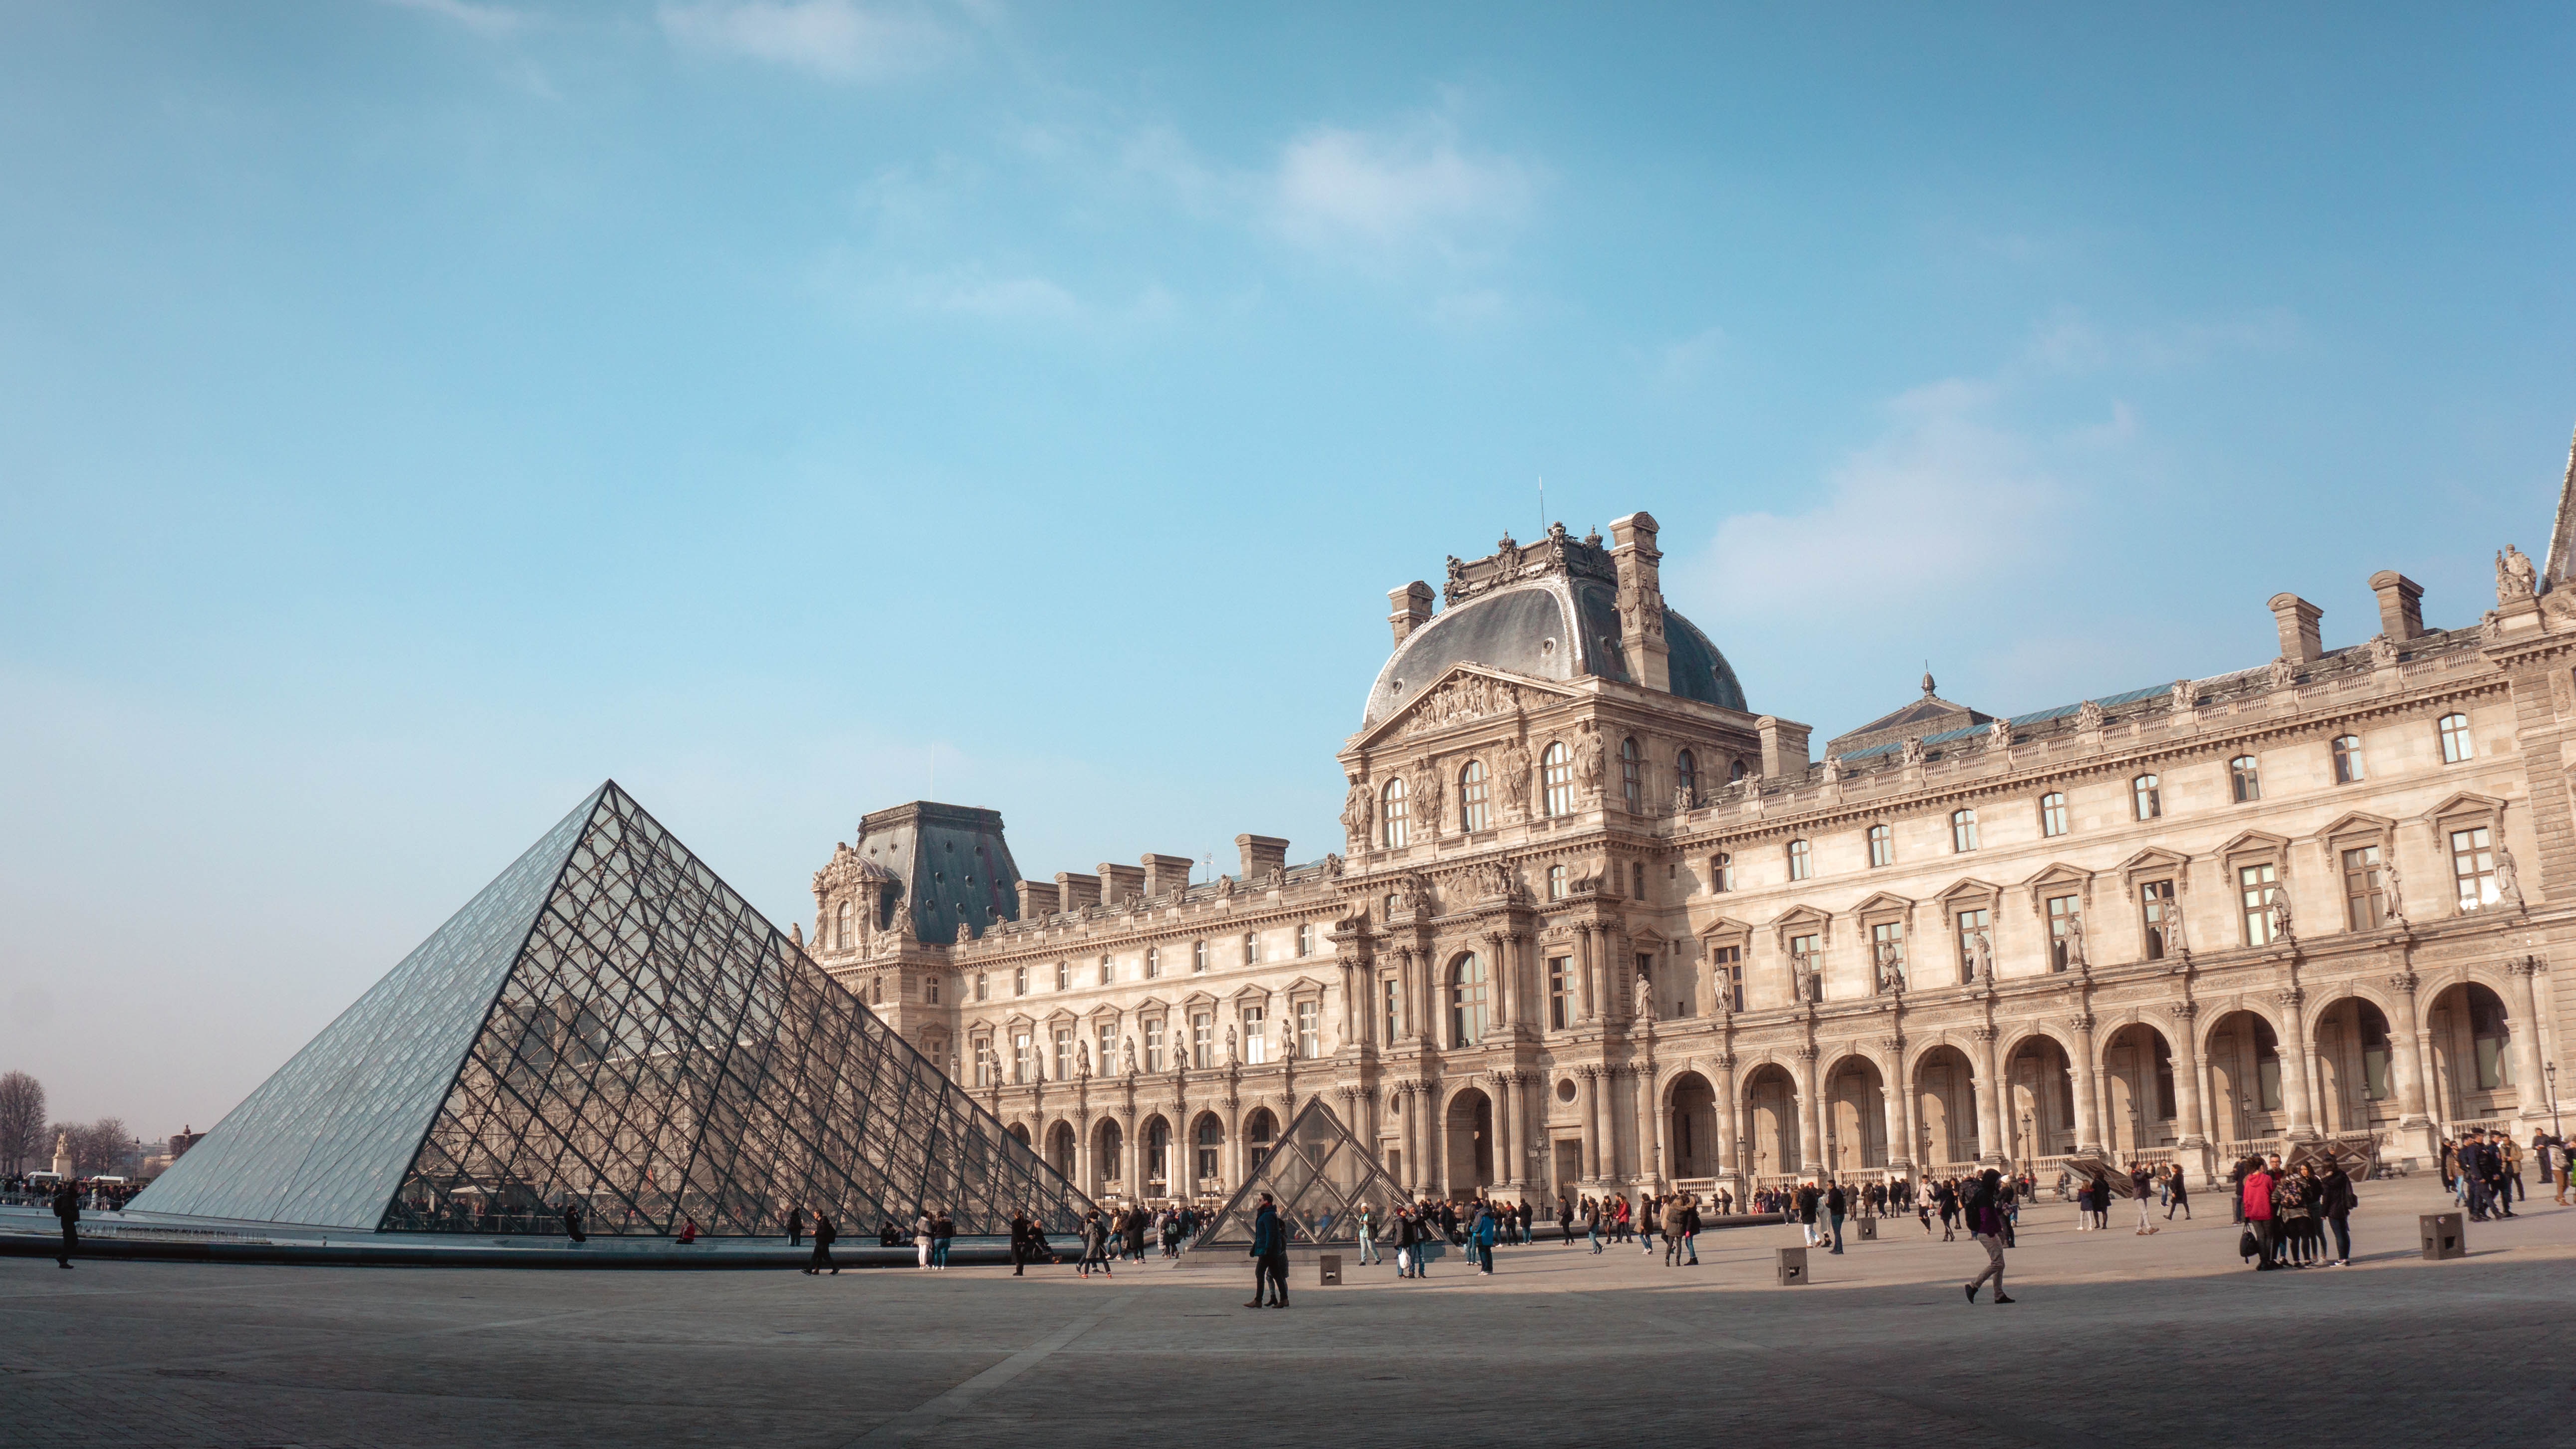 Flight Deal: East Coast To Paris For Only $261